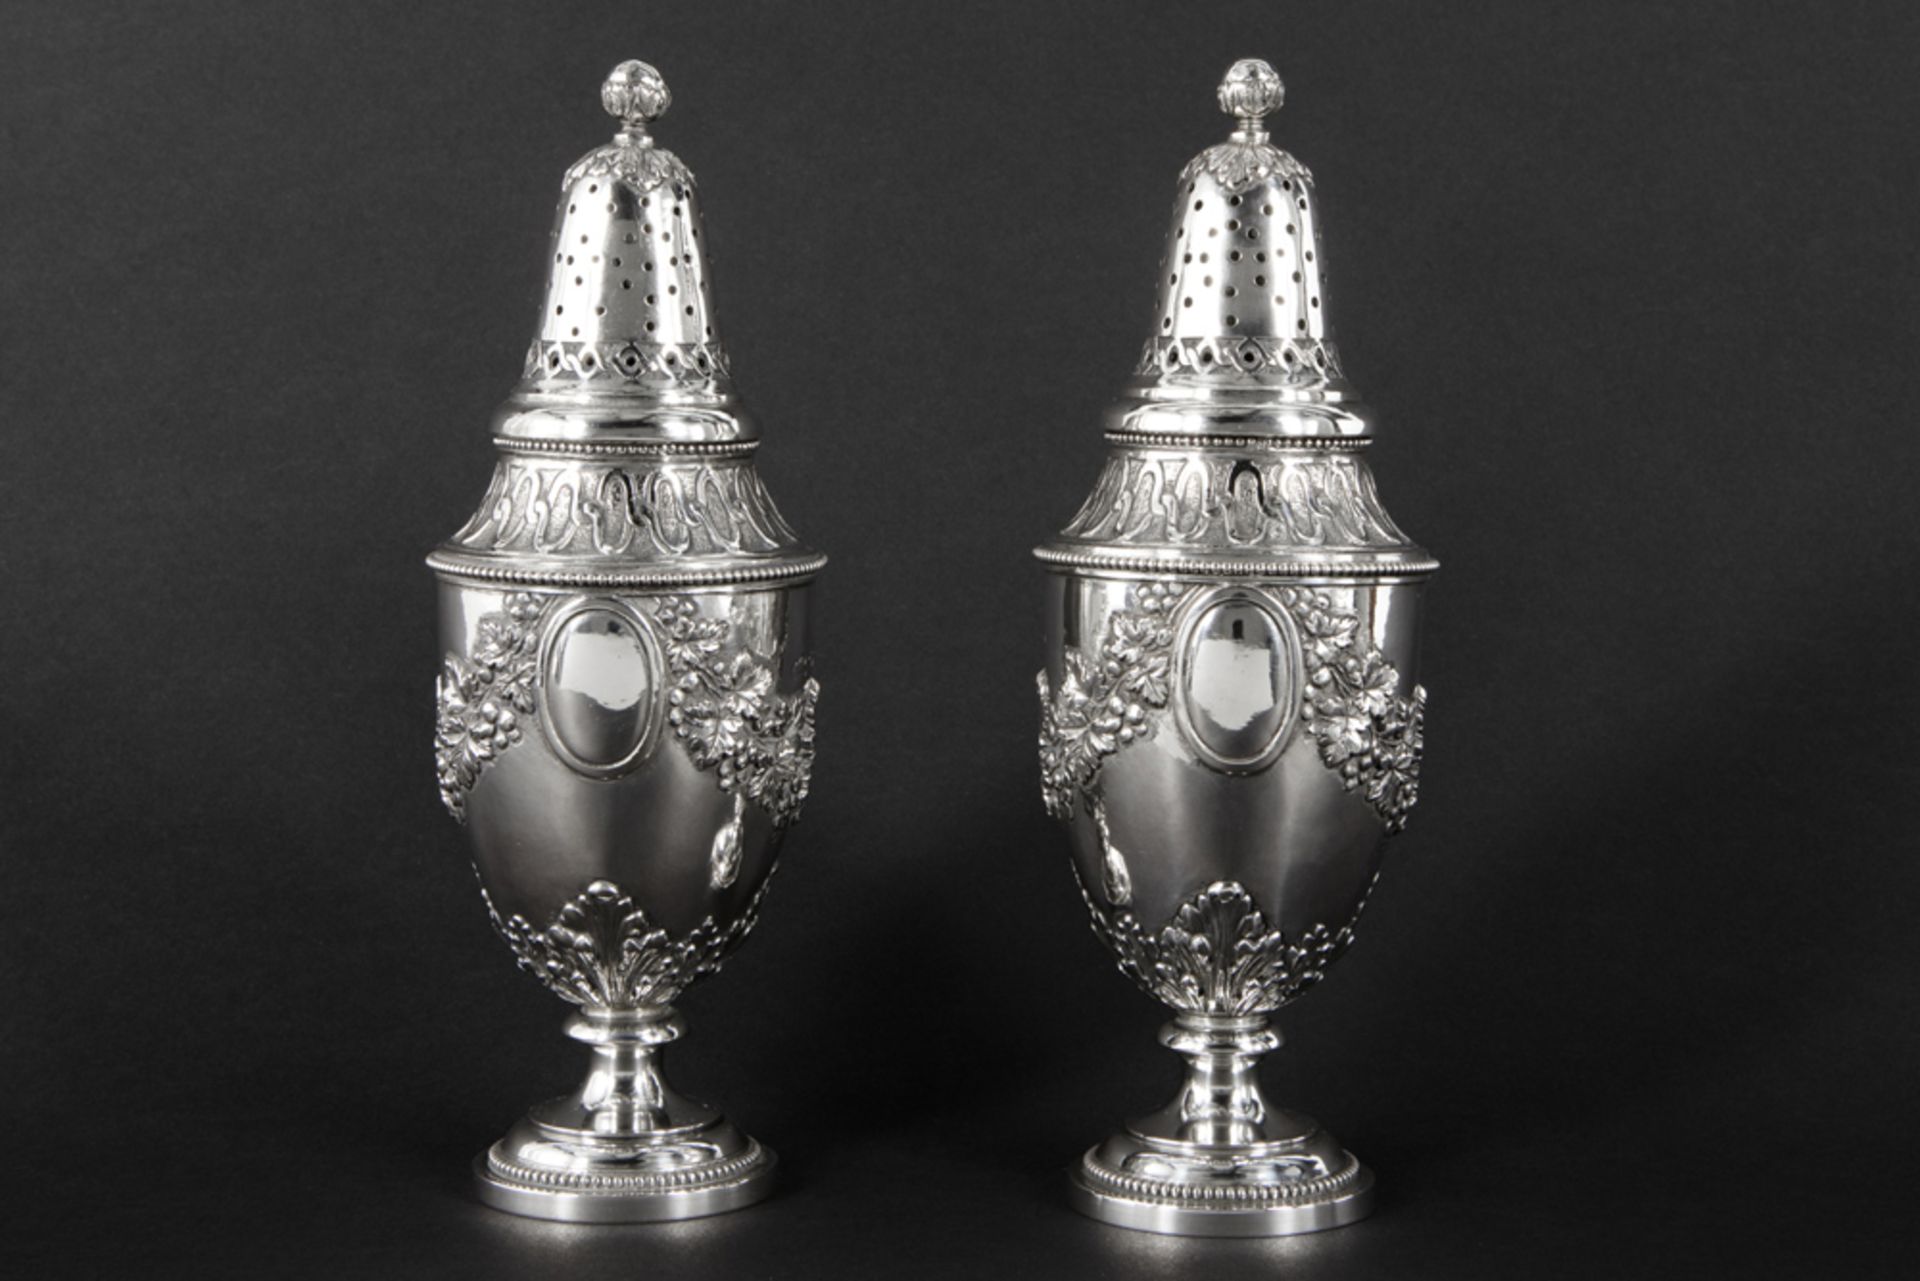 pair of antique presumably French neoclassical castors in silver with a mark of Dijon (1756/9) ||